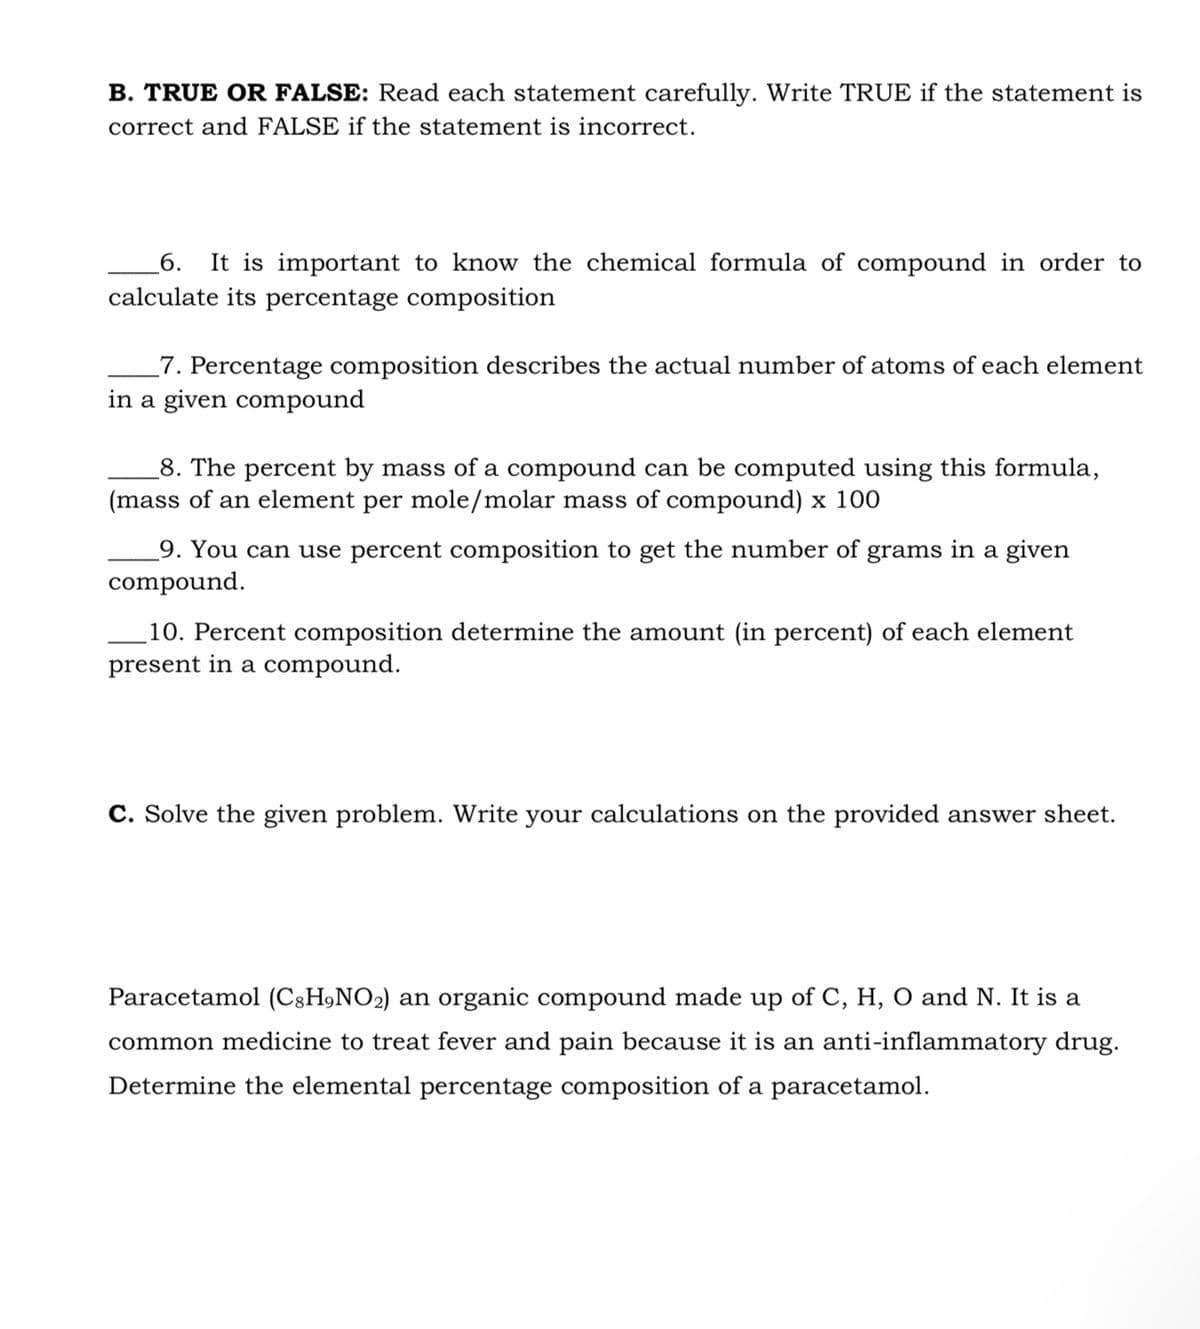 B. TRUE OR FALSE: Read each statement carefully. Write TRUE if the statement is
correct and FALSE if the statement is incorrect.
6.
It is important to know the chemical formula of compound in order to
calculate its percentage composition
_7. Percentage composition describes the actual number of atoms of each element
in a given compound
_8. The percent by mass of a compound can be computed using this formula,
(mass of an element per mole/molar mass of compound) x 100
_9. You can use percent composition to get the number of grams in a given
compound.
10. Percent composition determine the amount (in percent) of each element
present in a compound.
C. Solve the given problem. Write your calculations on the provided answer sheet.
Paracetamol (C3H,NO2) an organic compound made up of C, H, O and N. It is a
common medicine to treat fever and pain because it is an anti-inflammatory drug.
Determine the elemental percentage composition of a paracetamol.
